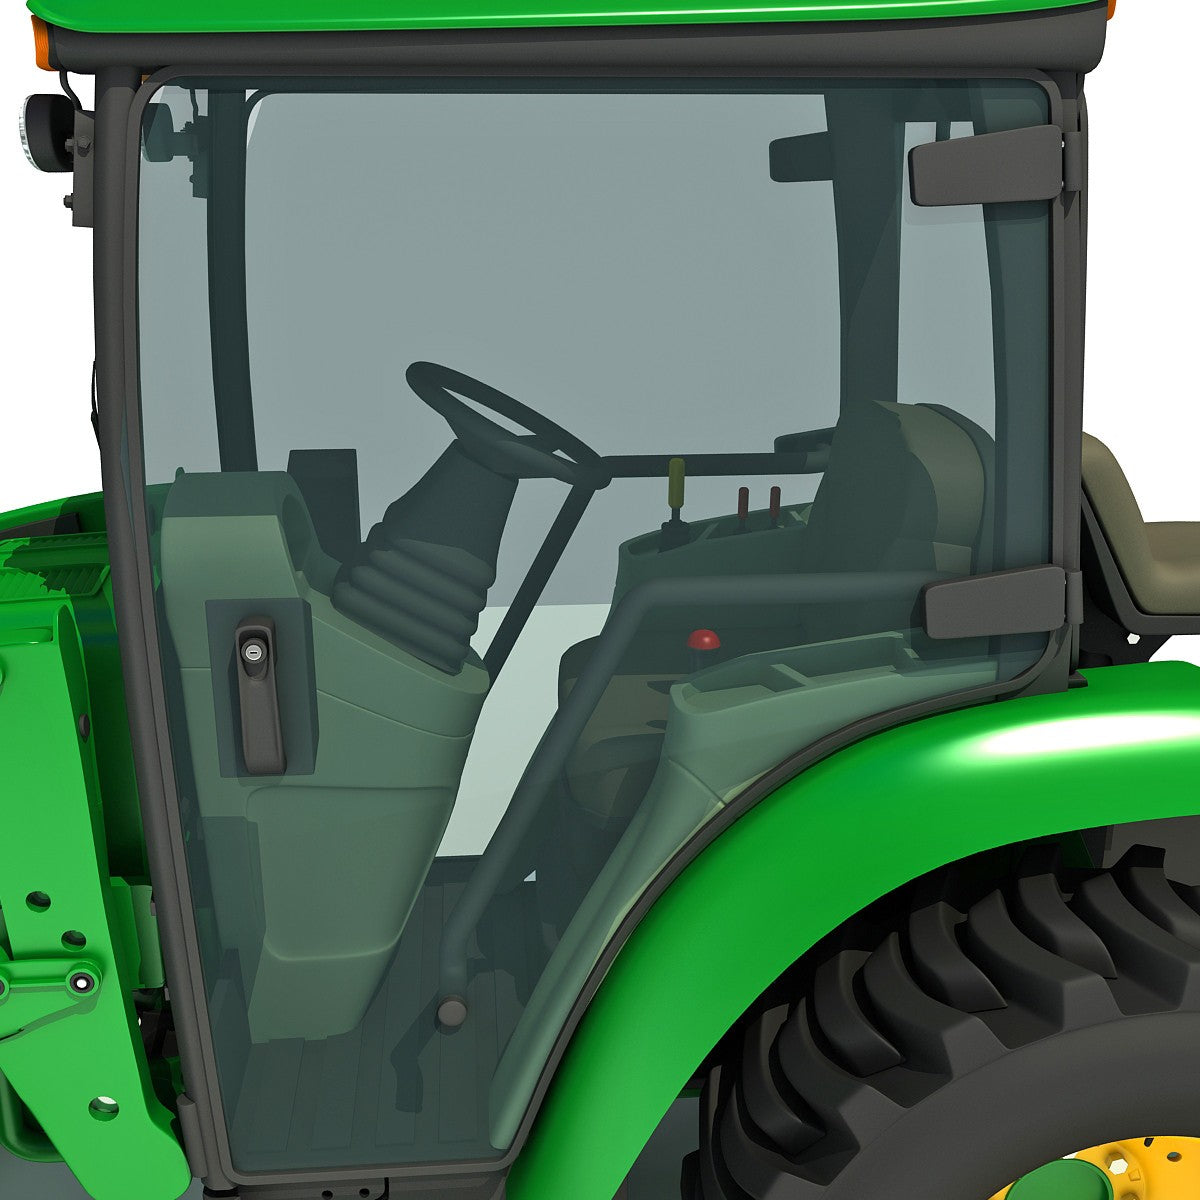 Compact Utility Tractor 3D Model